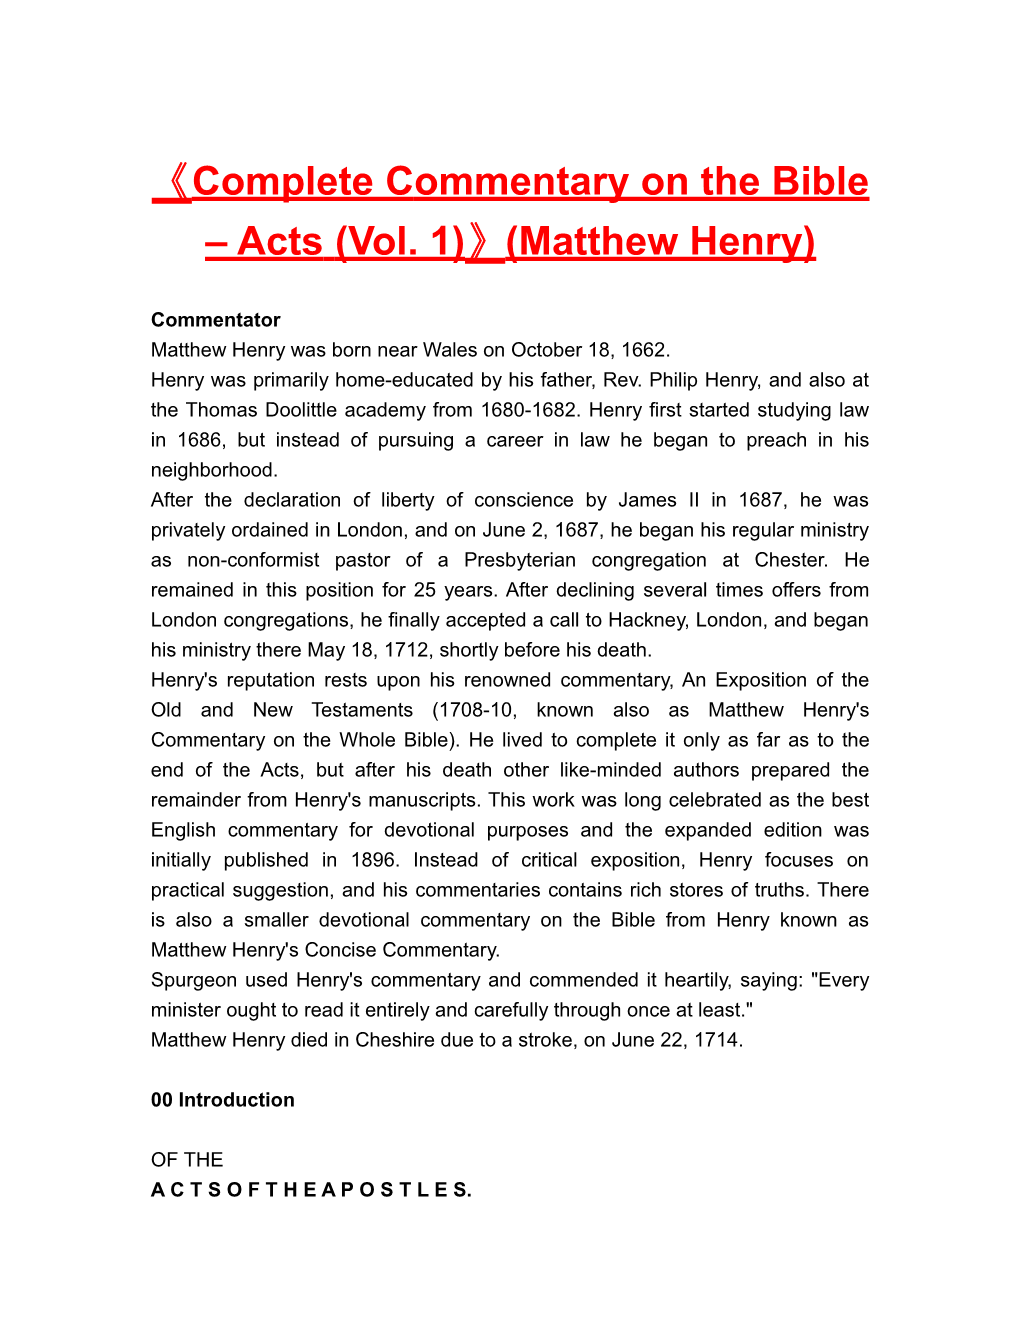 Completecommentary on the Bible Acts(Vol. 1) (Matthew Henry)